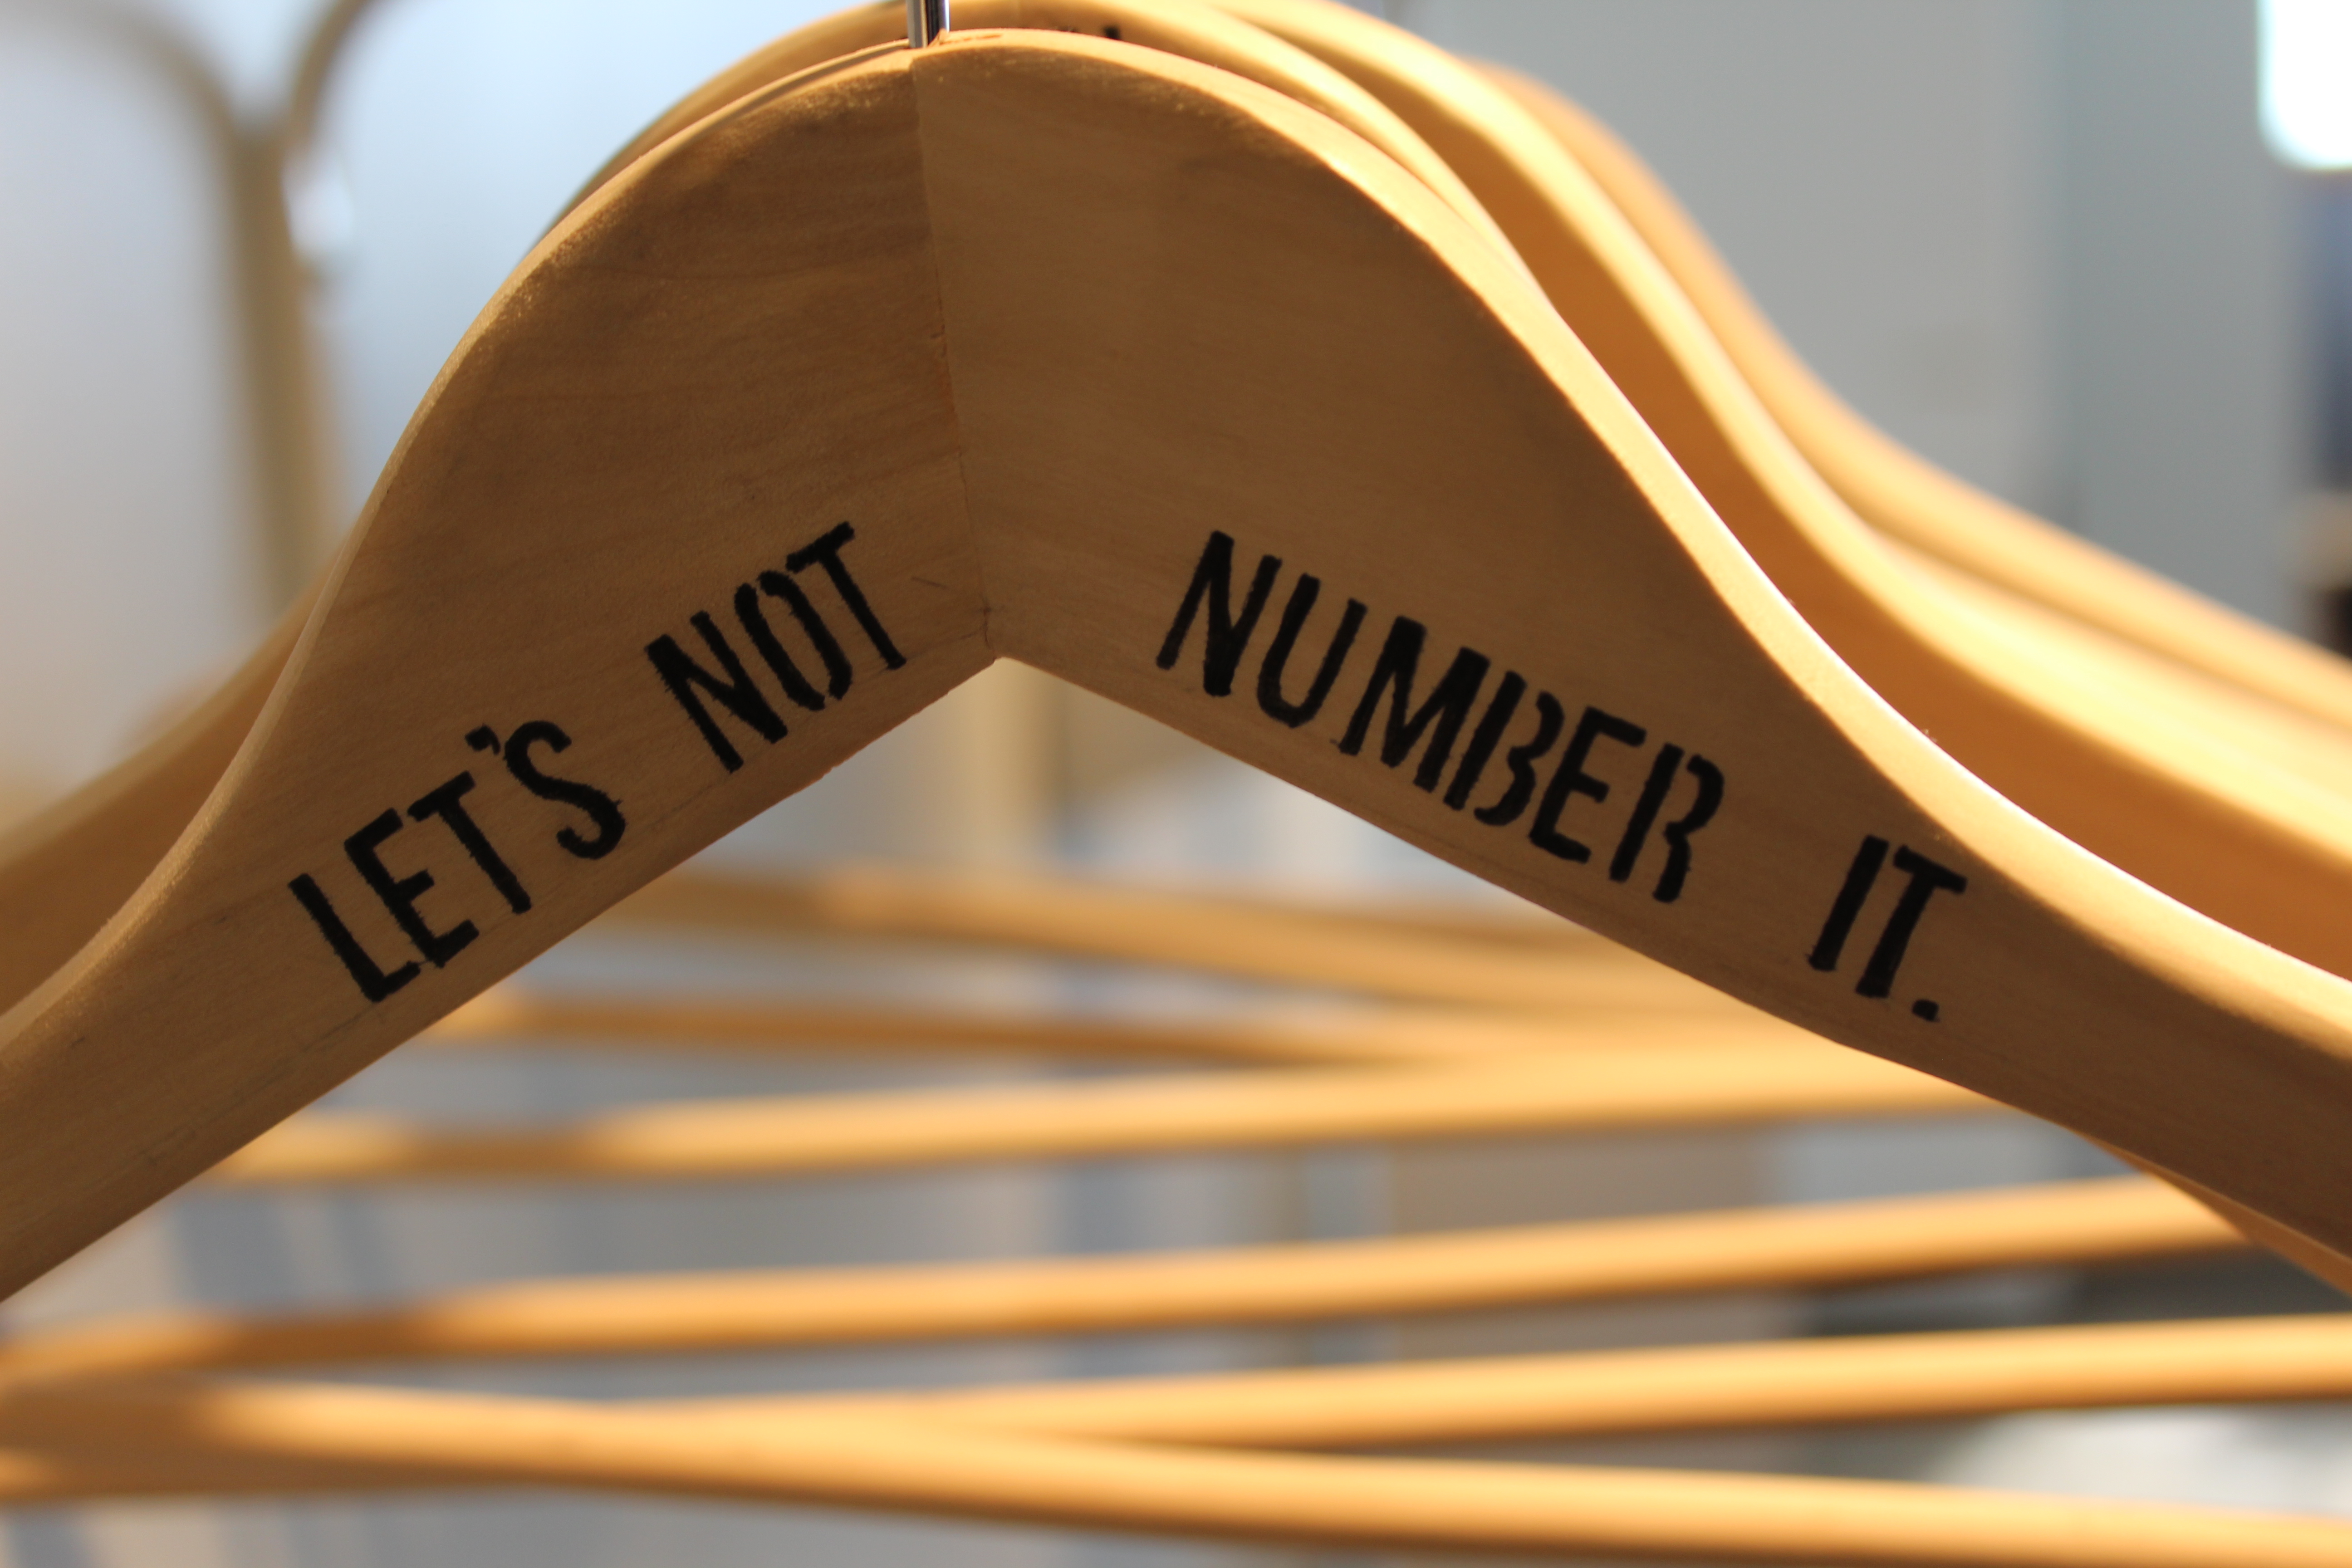 Wooden hangers with words "Let's not number it"